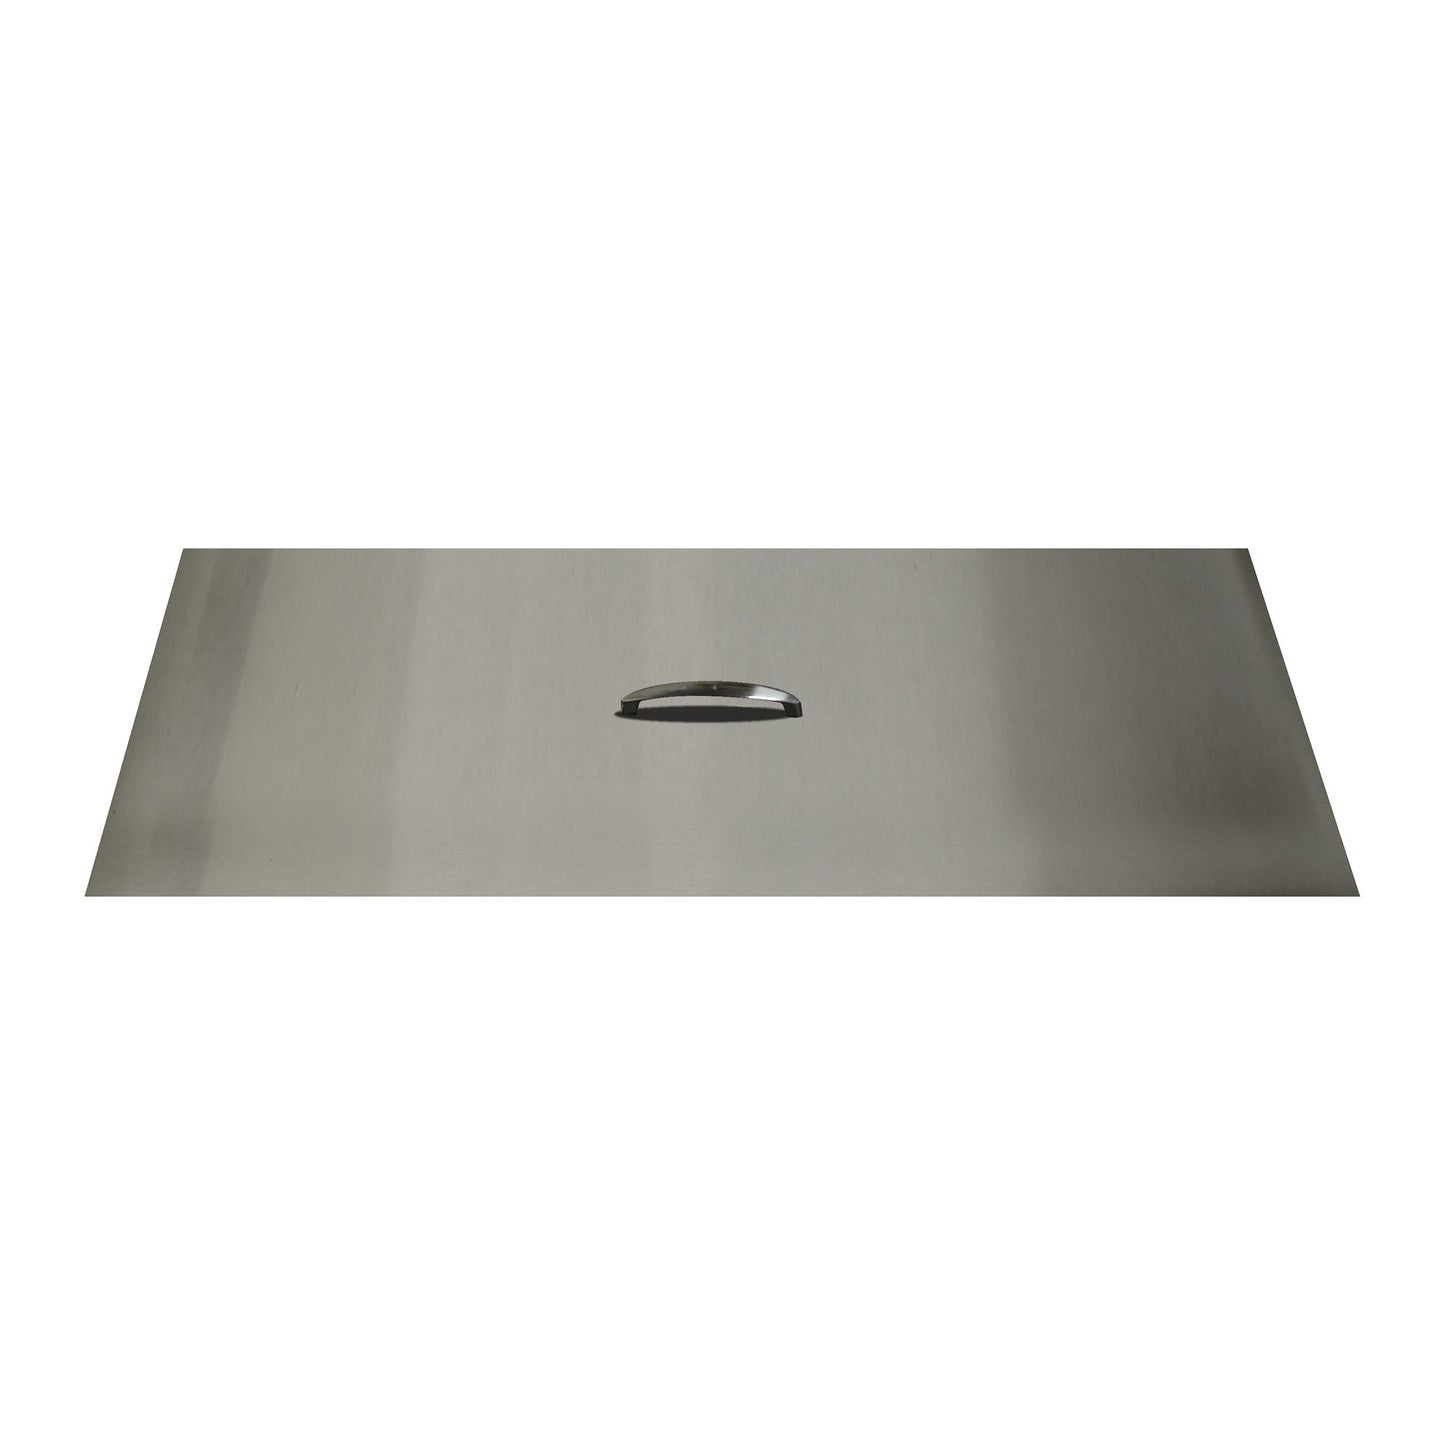 The Outdoor Plus 12" x 62" Stainless Steel Rectangular Fire Pit Lid Cover